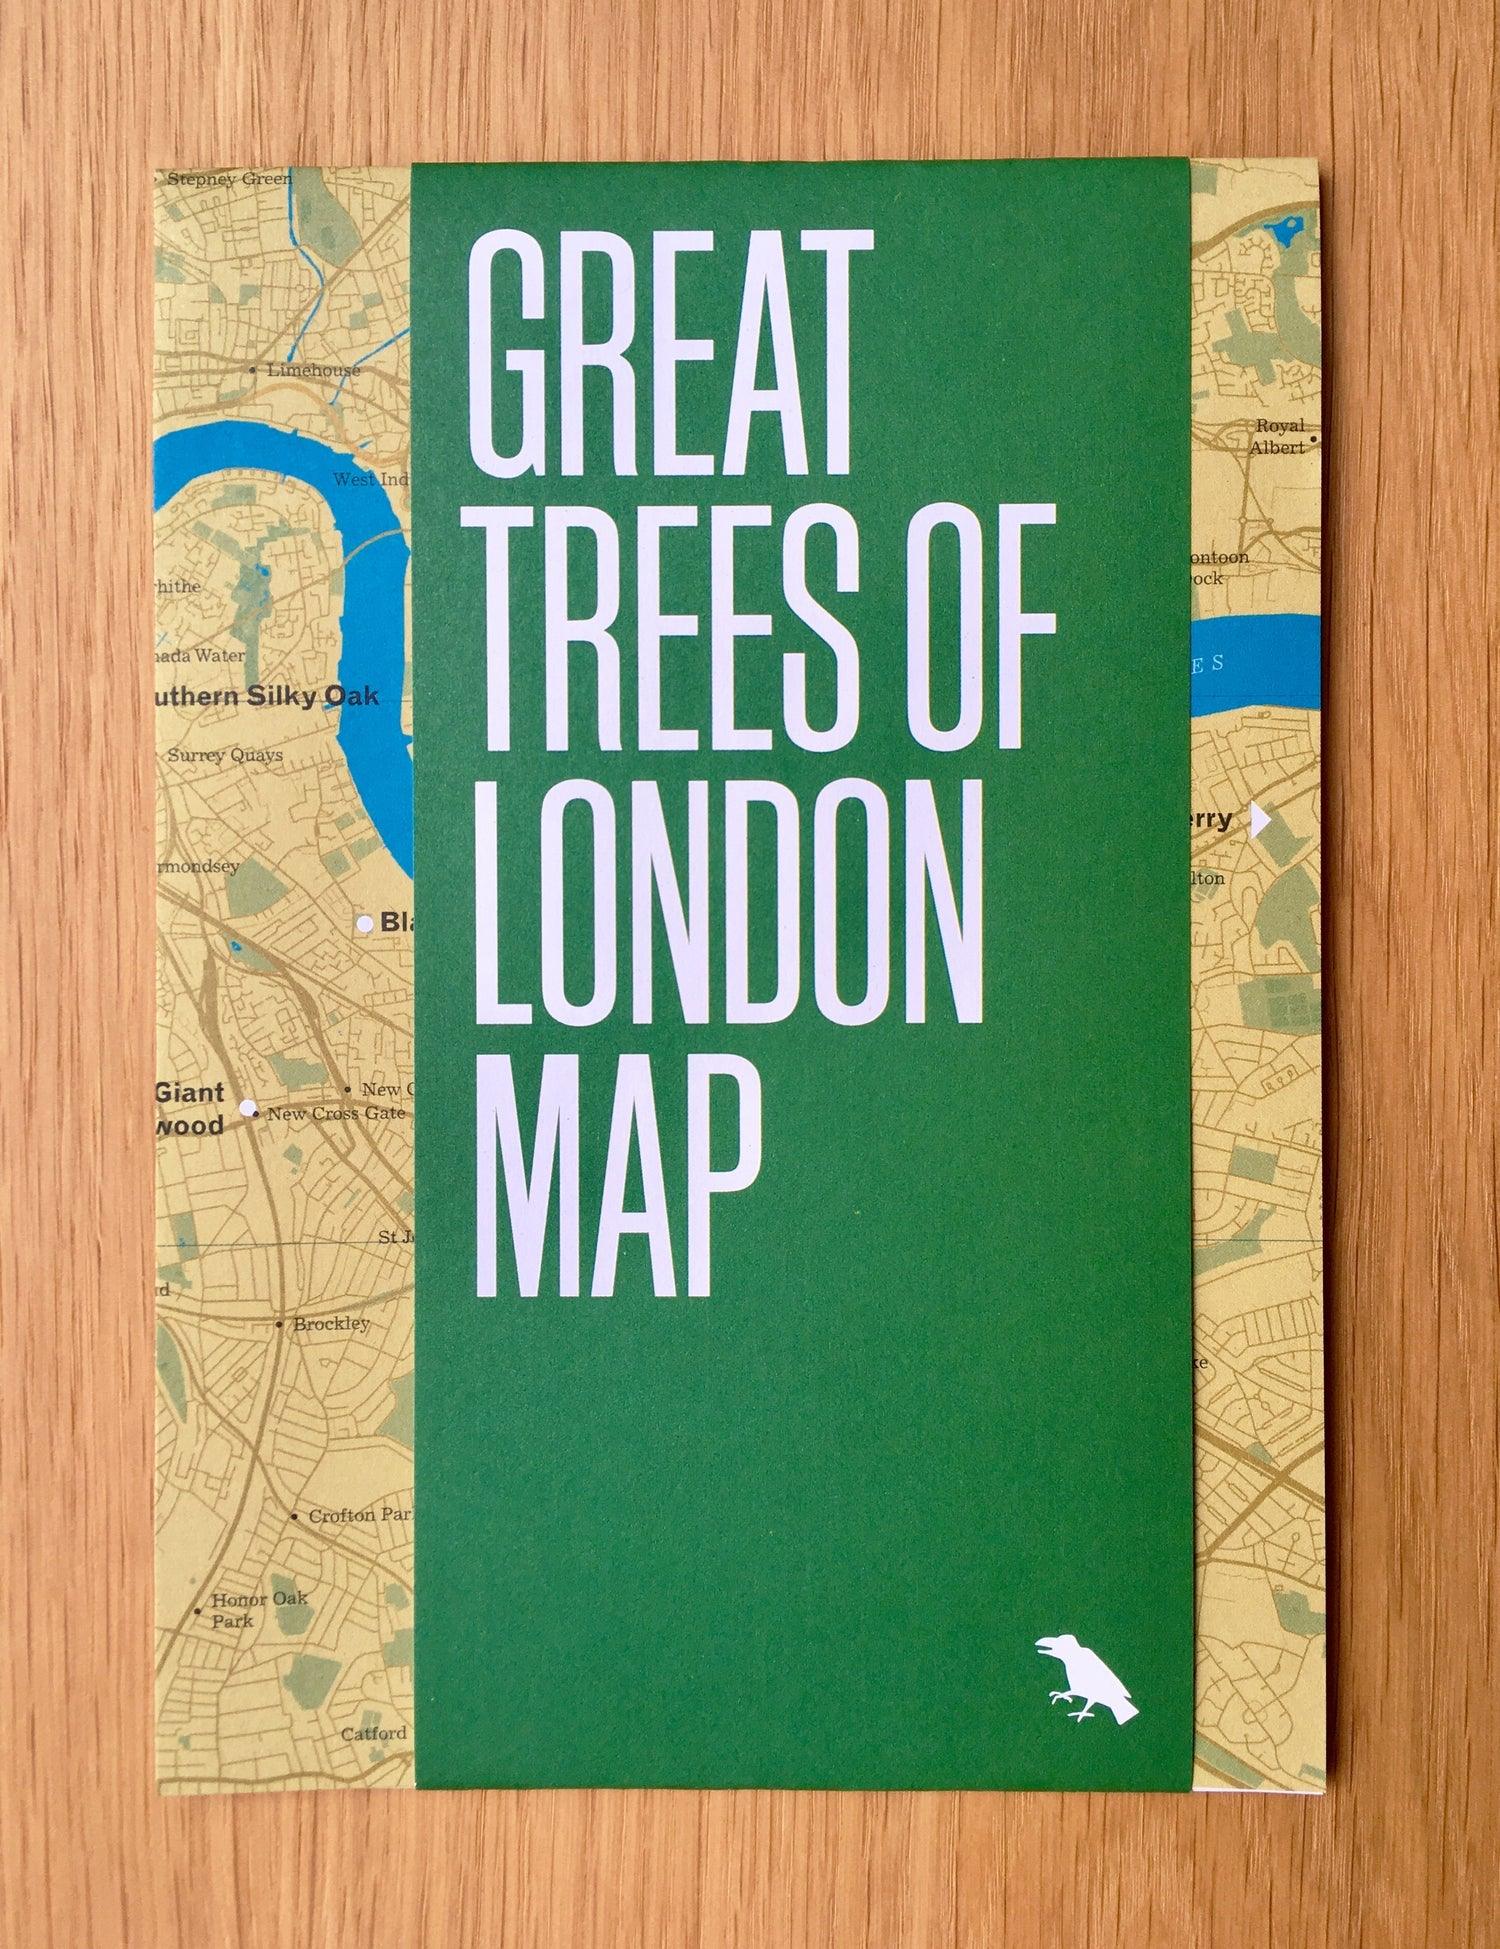 Great Trees of London Map - Pretty Shiny Shop